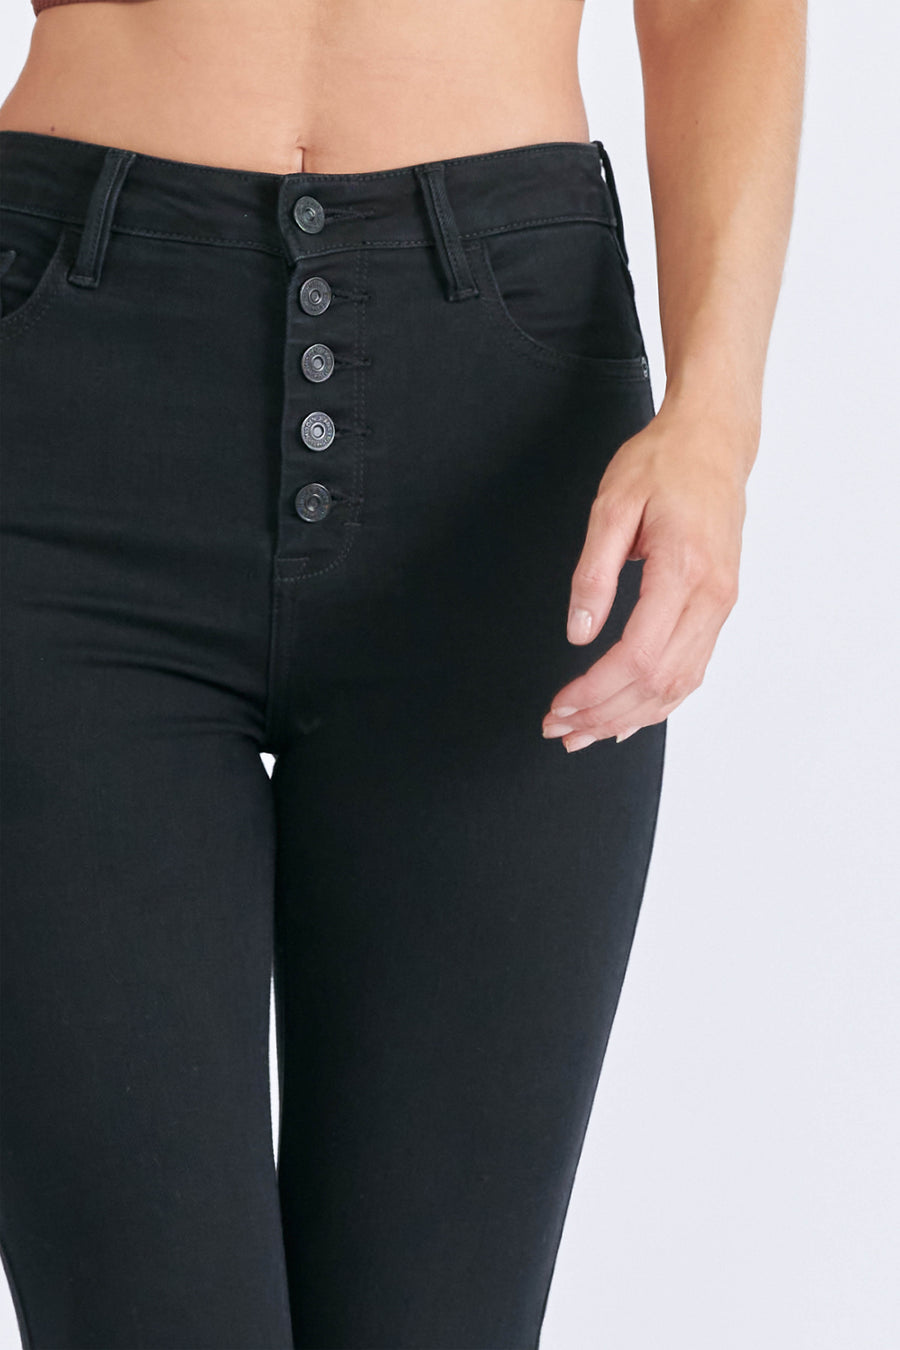 TAYLOR <p/> BLACK FIVE BUTTON HIGH RISE STRETCH SKINNY